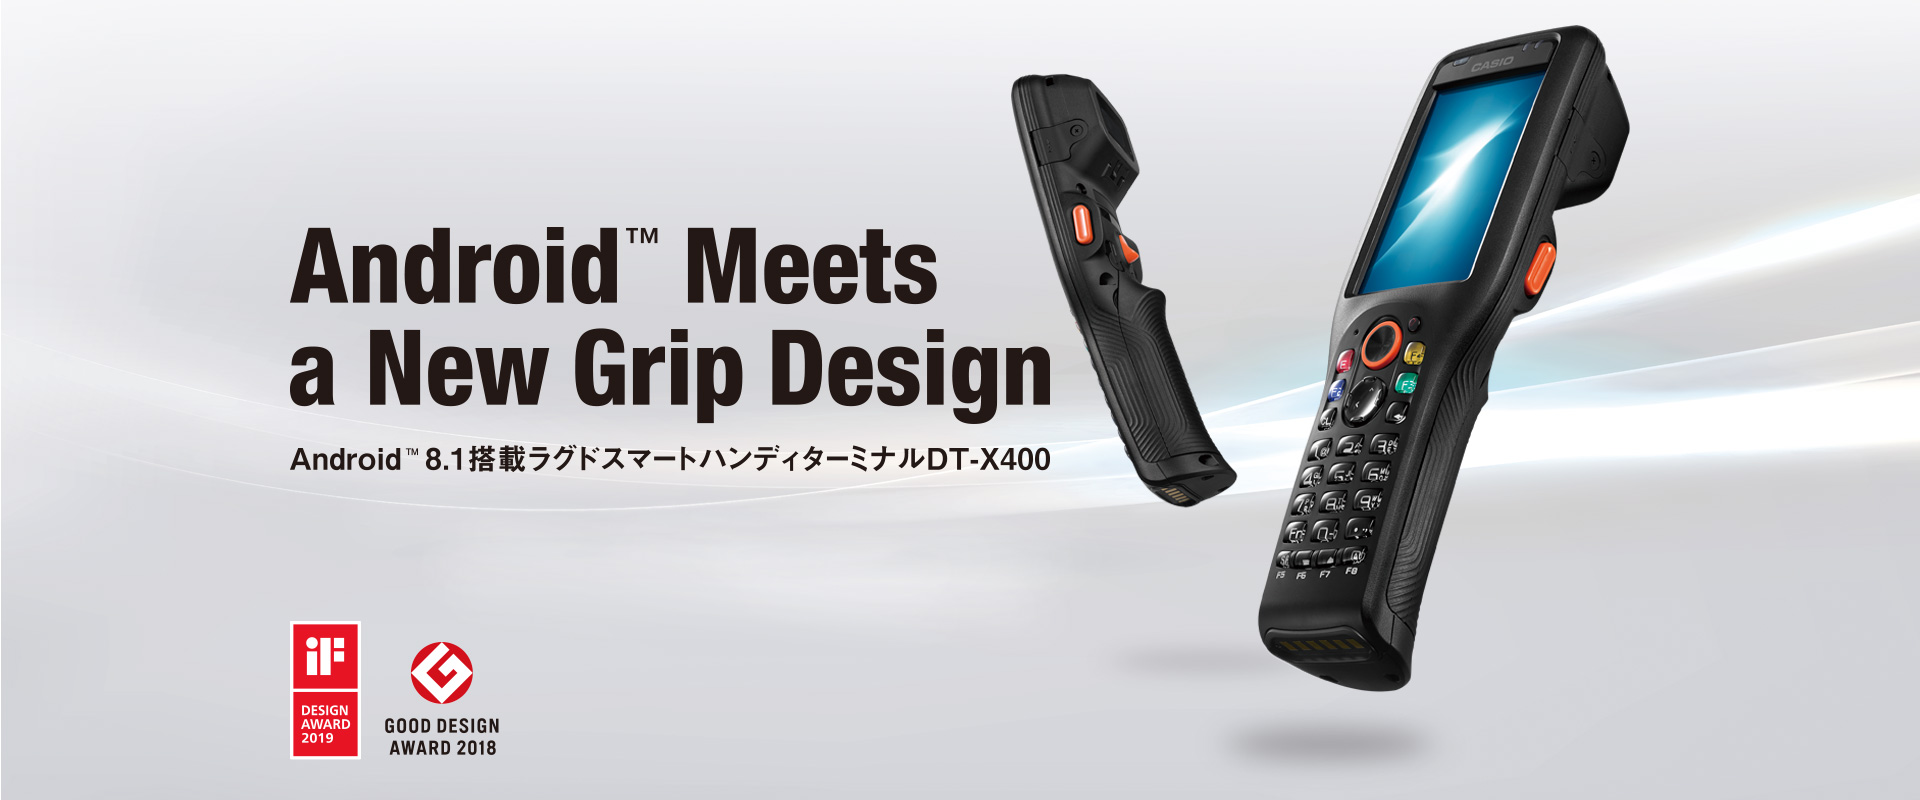 Android™ Meets a New Grip Design Android™8.1搭載 ラグドスマートハンディターミナル DX-x400